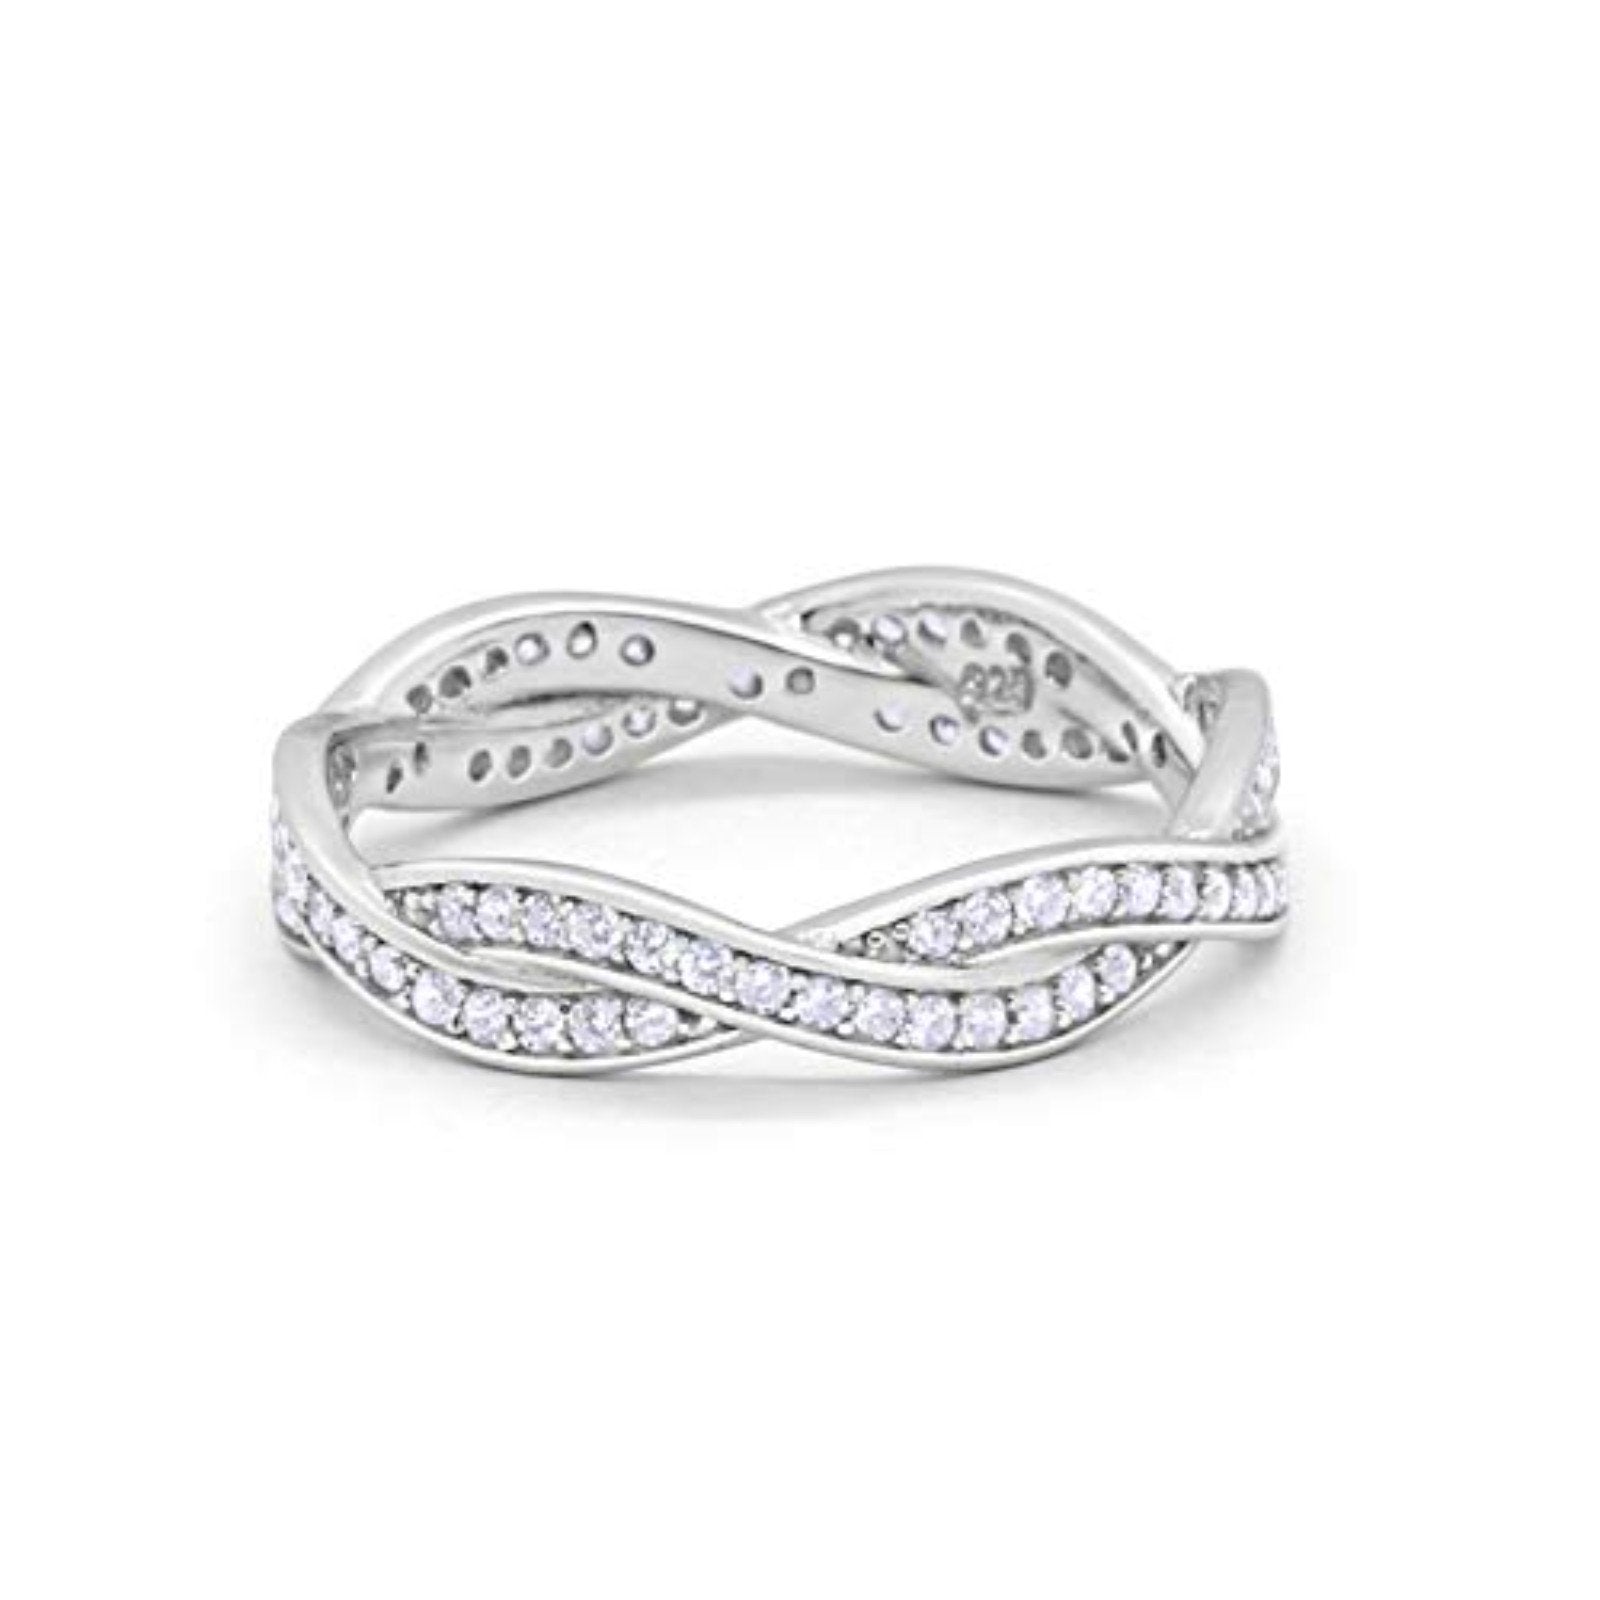 Crisscross Braided Weave Design Band Ring Round Eternity Simulated CZ 925 Sterling Silver